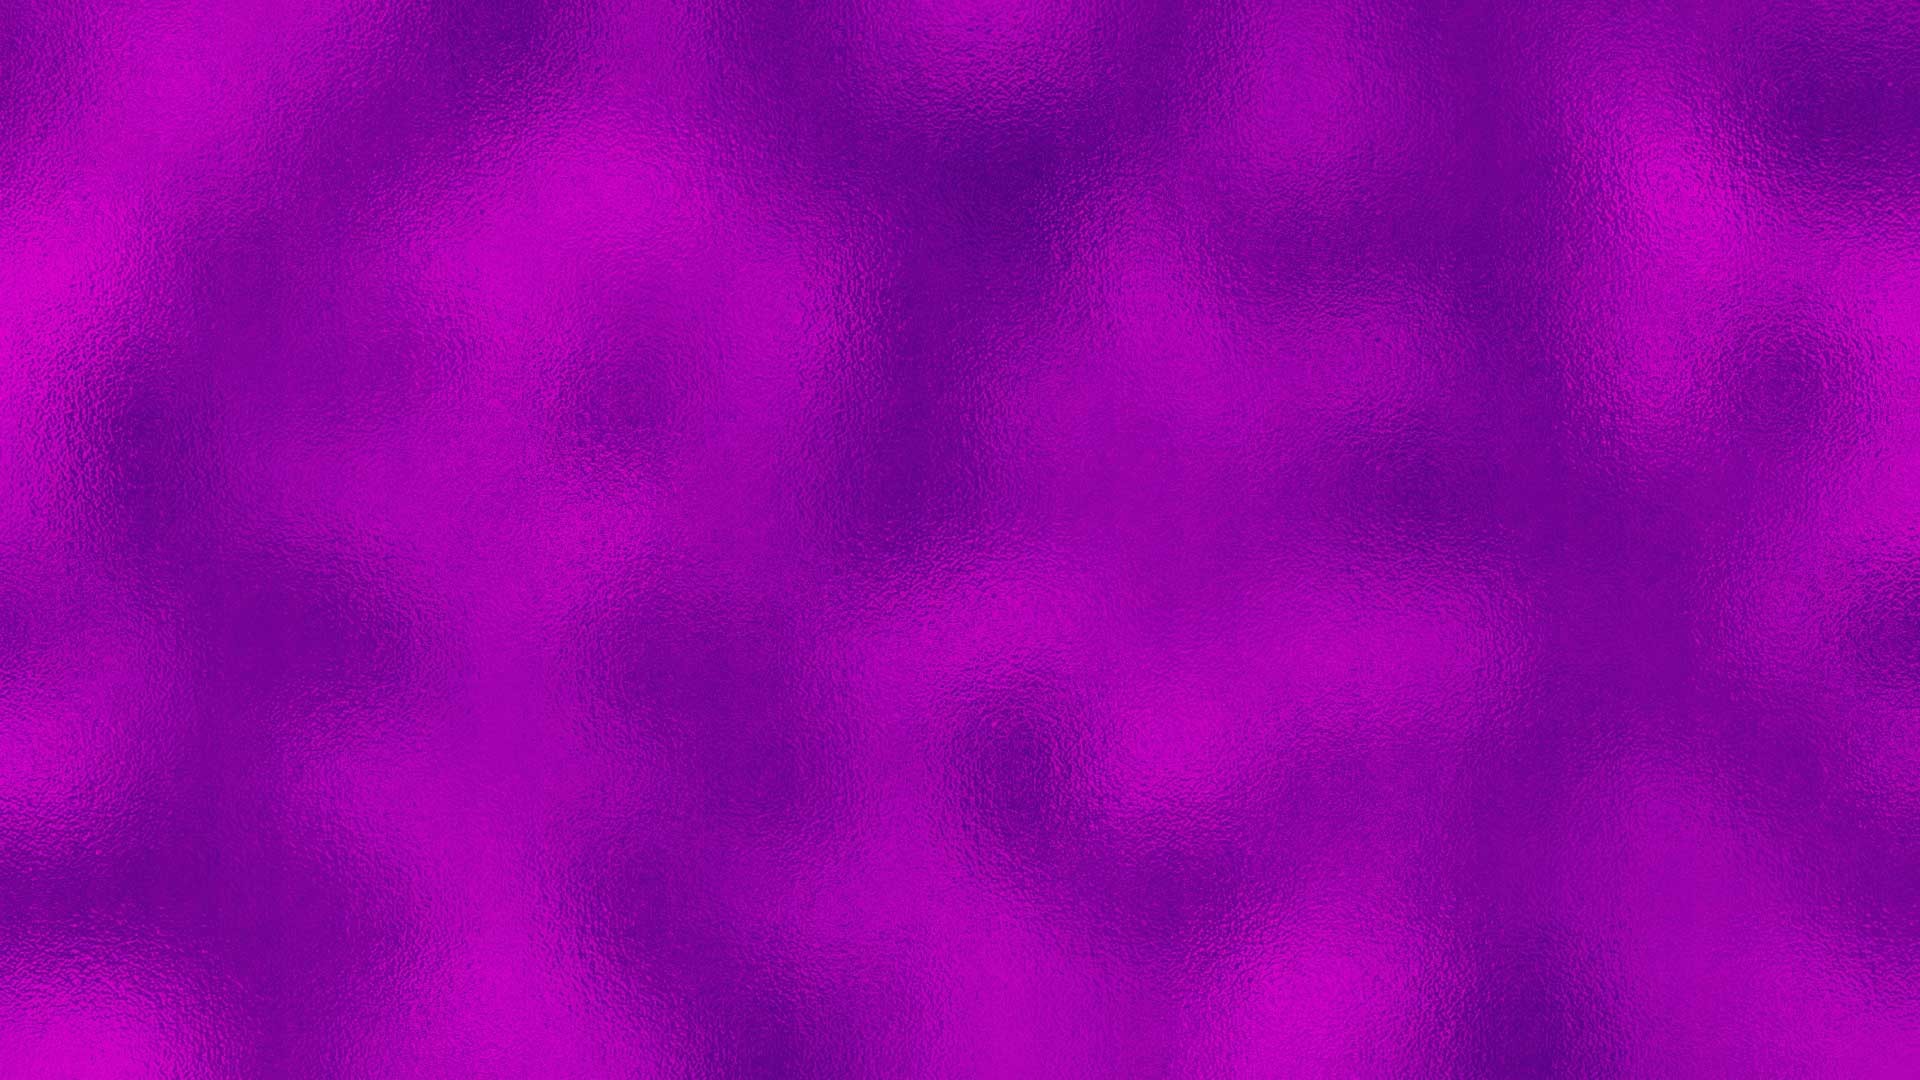 1920x1080 Gallery For > Pink And Purple Background